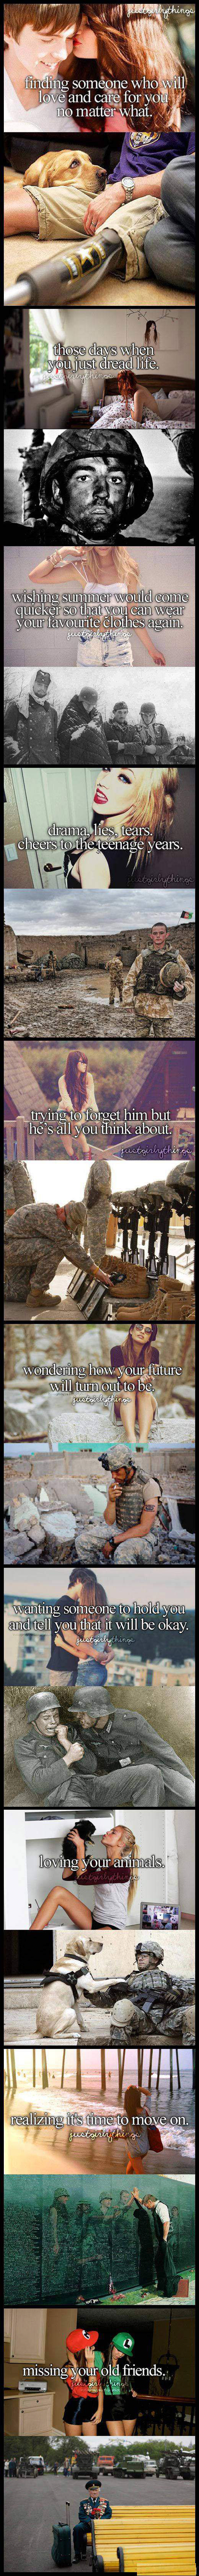 when teen expressions and sayings are juxtaposed with war photos